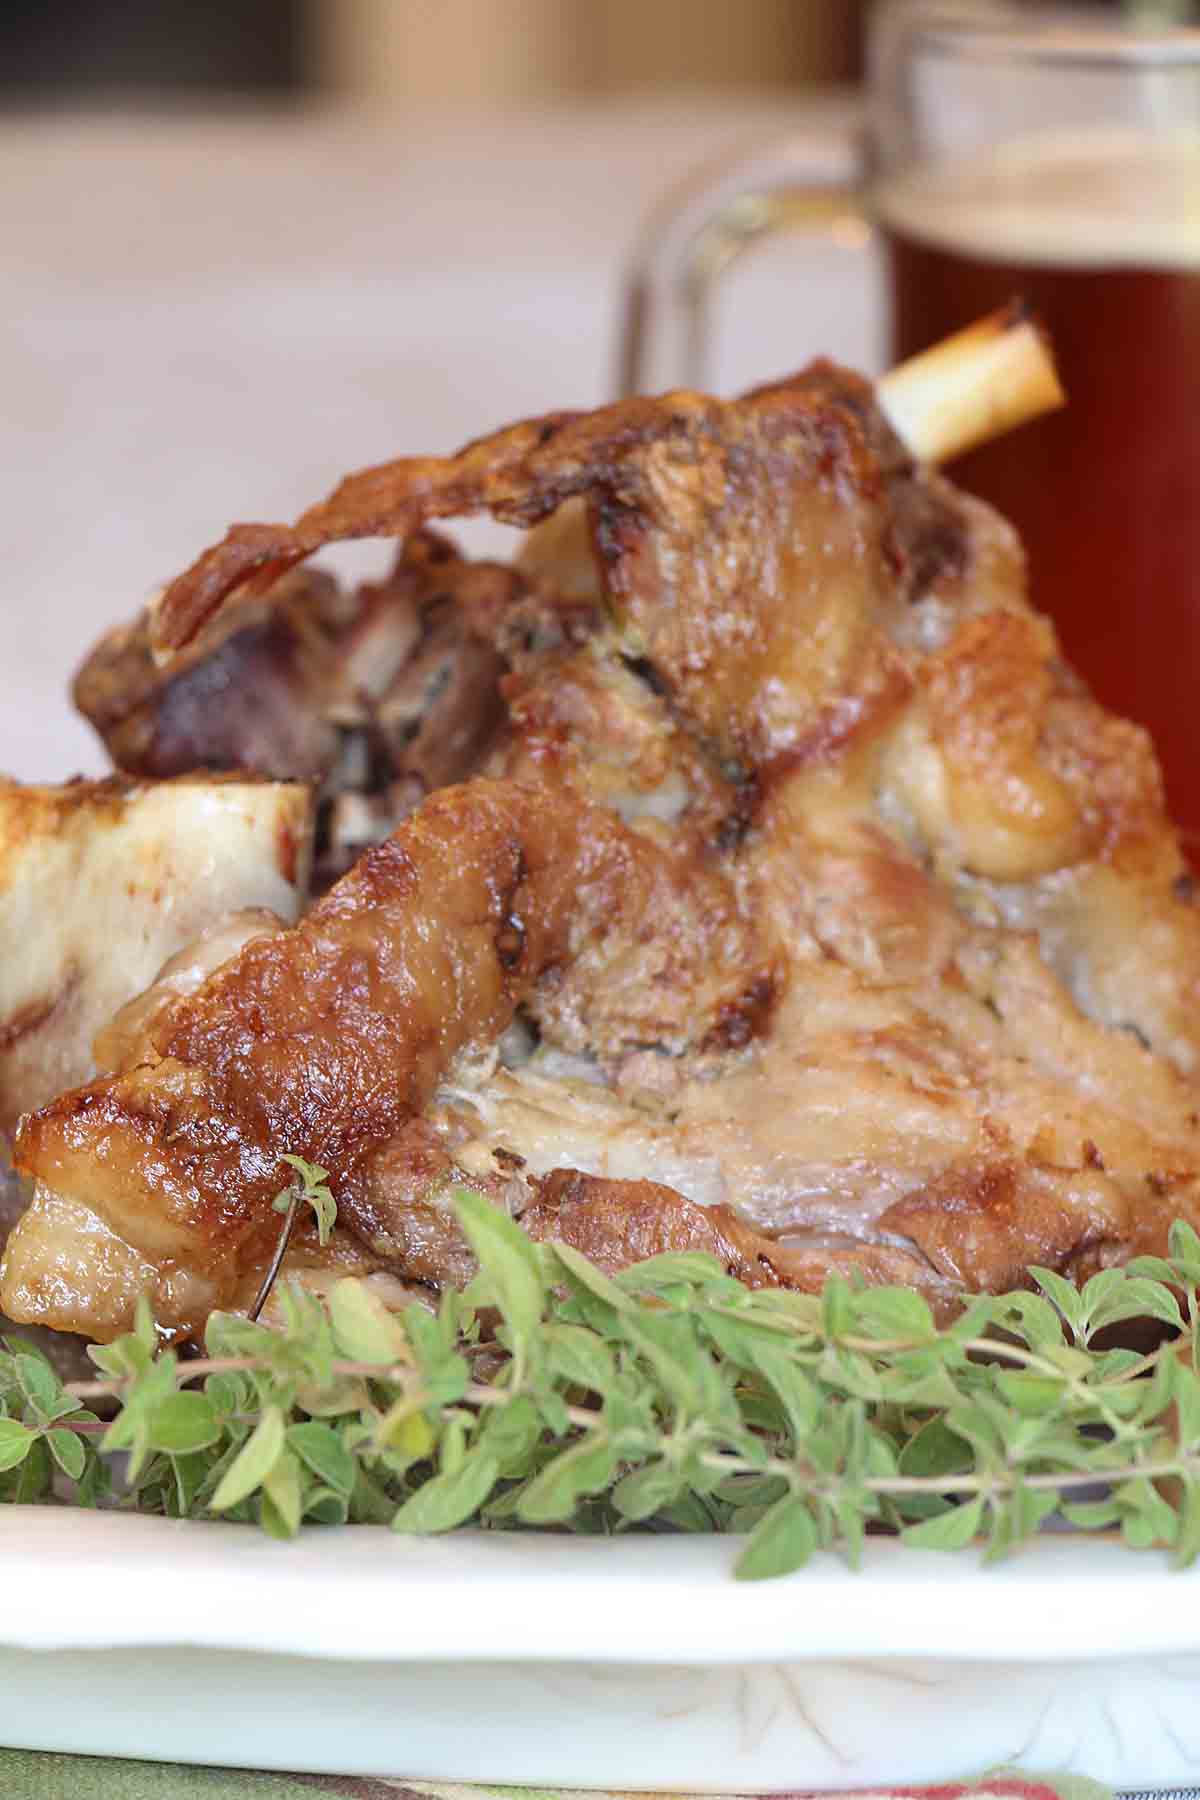 With fork tender meat and juicy crisp skin, this German Pork Hock recipe delivers a tasty dinner entree that's the best of the old country! 